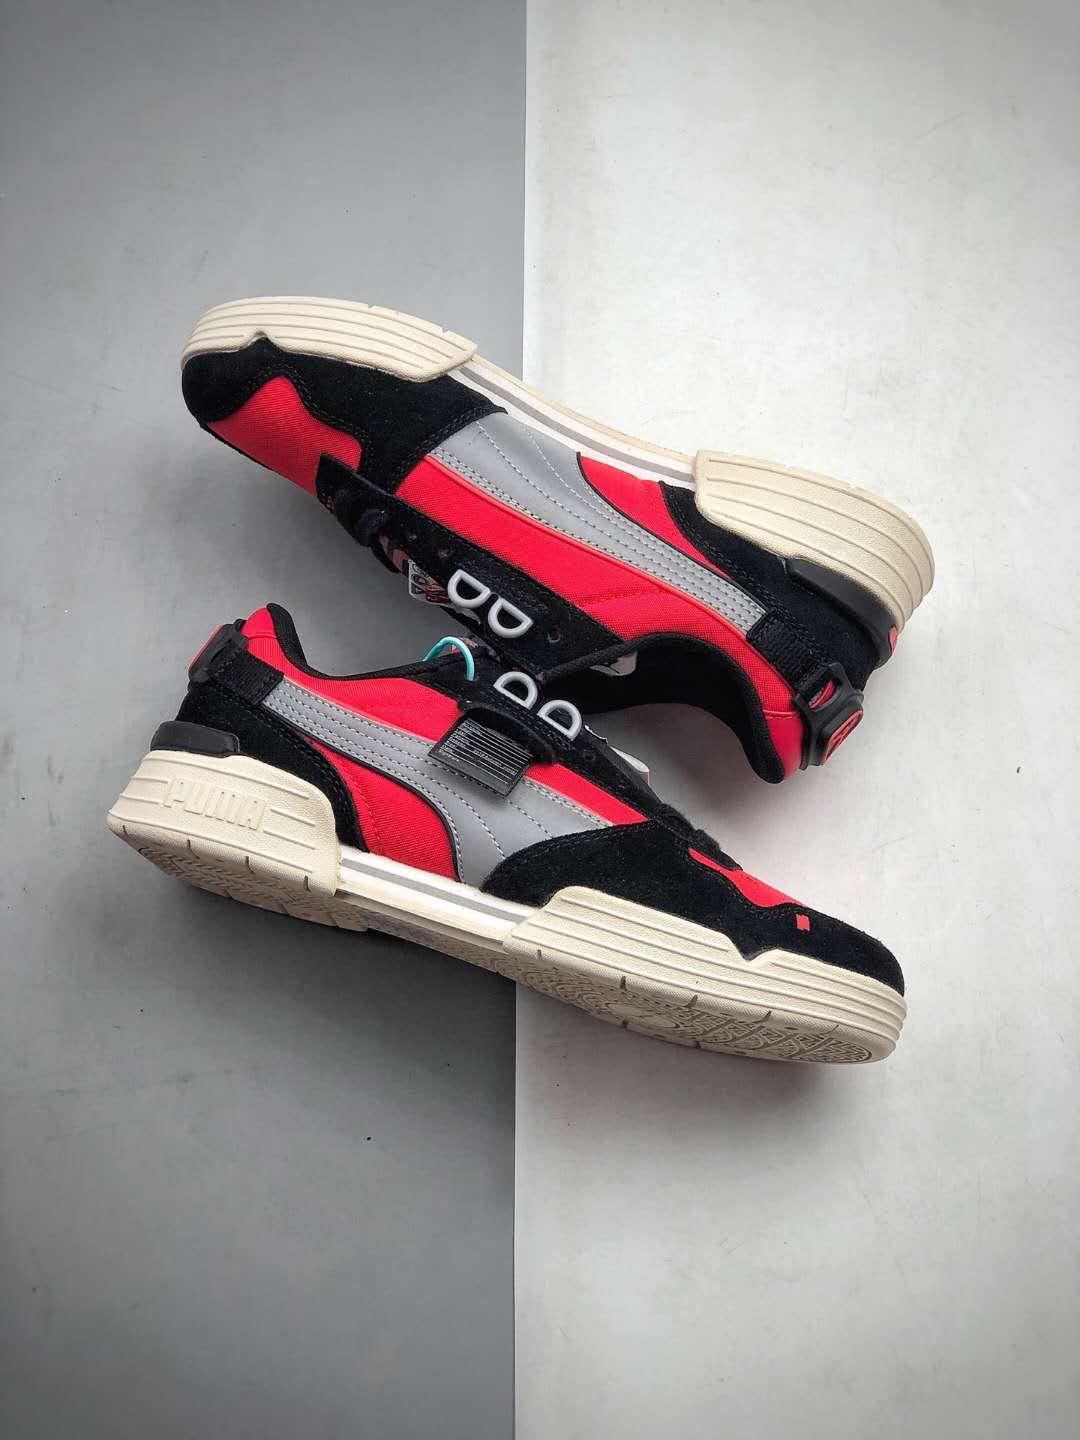 OG ADER Error x Puma CGR Trainers FT3 Whisper White - Limited Edition Collaborative Sneakers